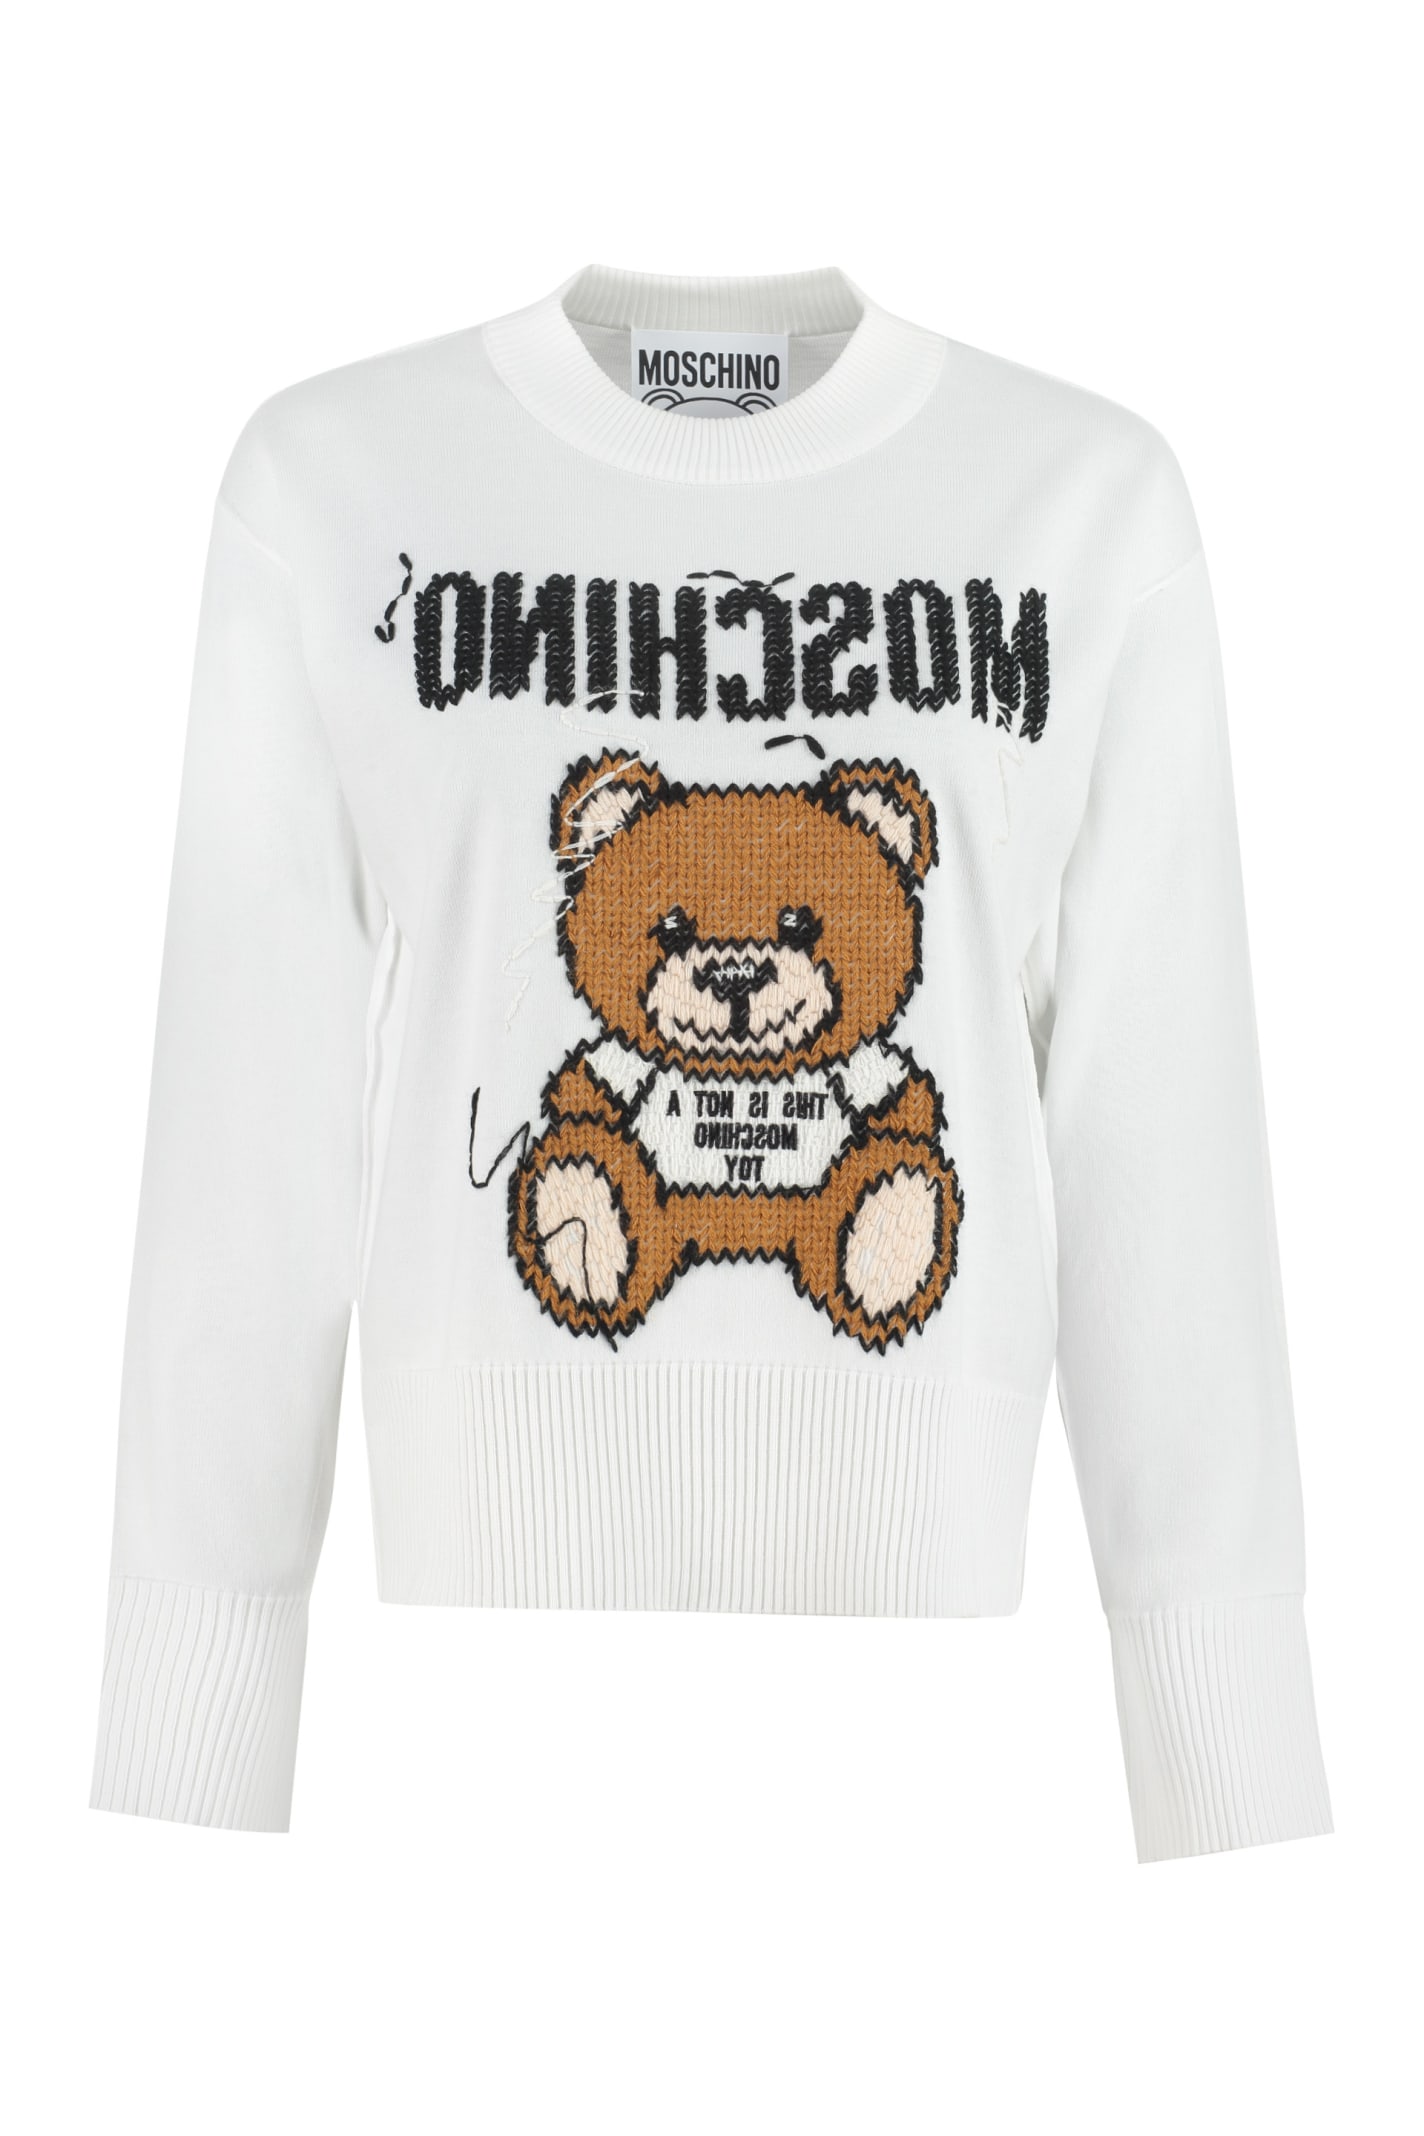 Moschino Embroidered Cotton Sweater